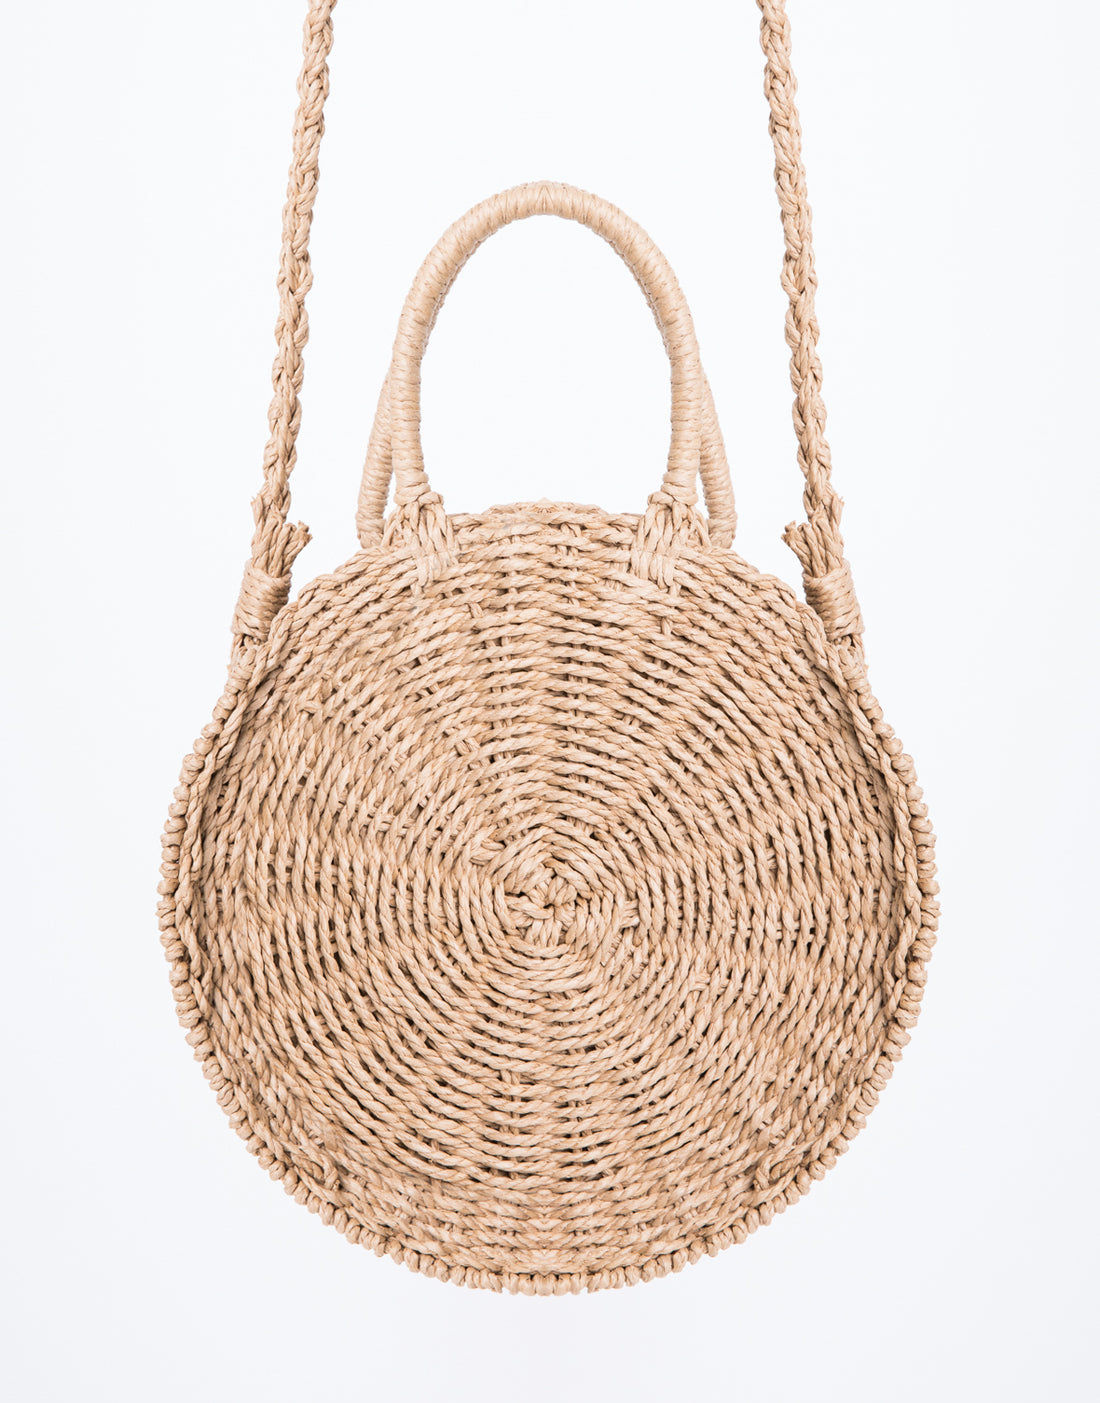 West Coast Round Straw Bag Accessories Natural One Size -2020AVE